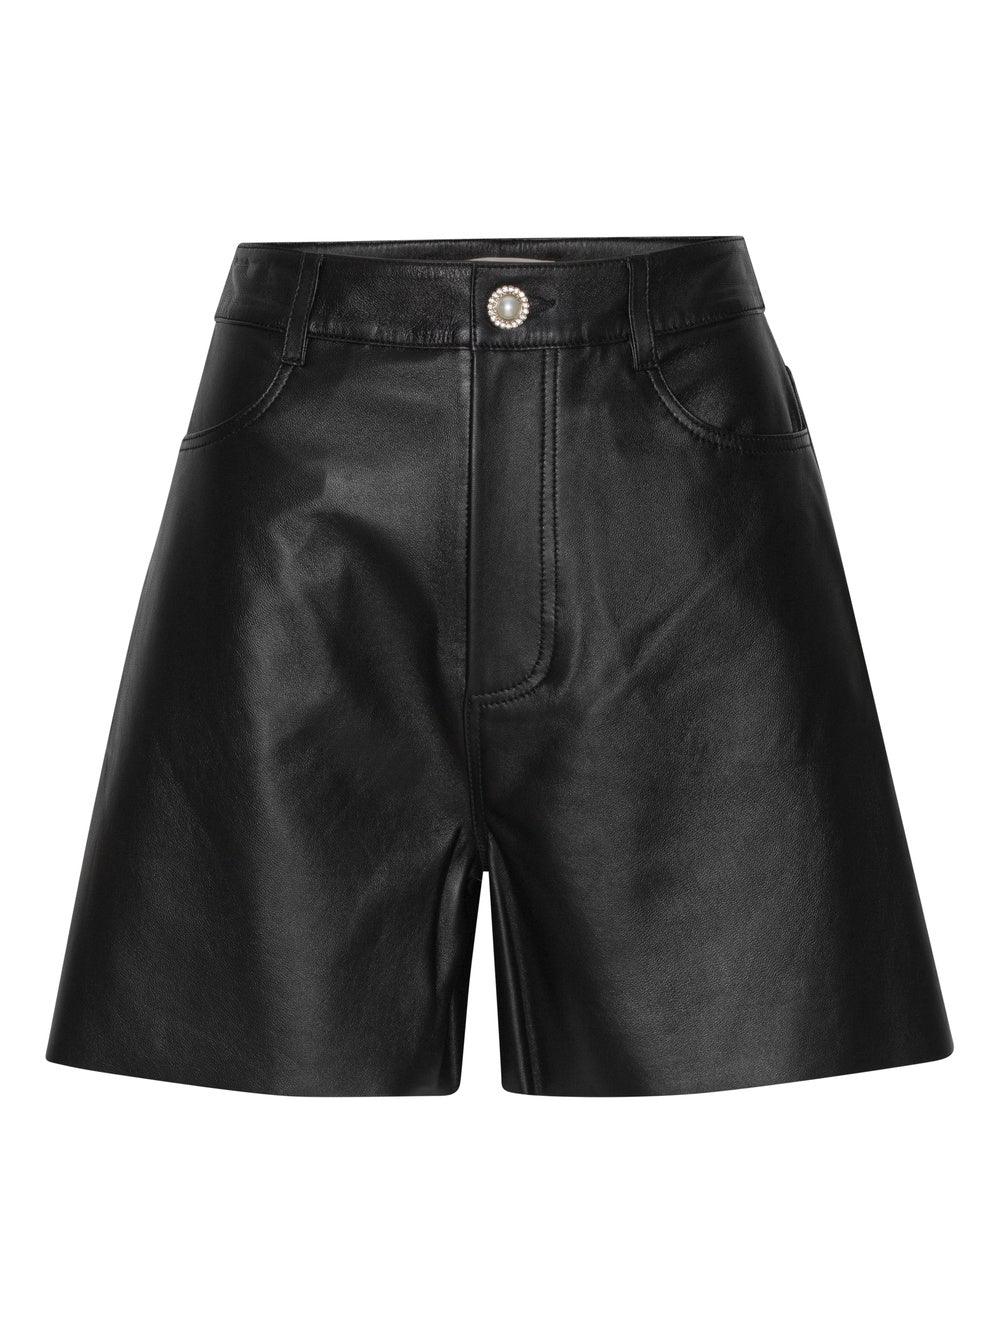 custommade - Nava Black Leather Shorts - 32 The Guild